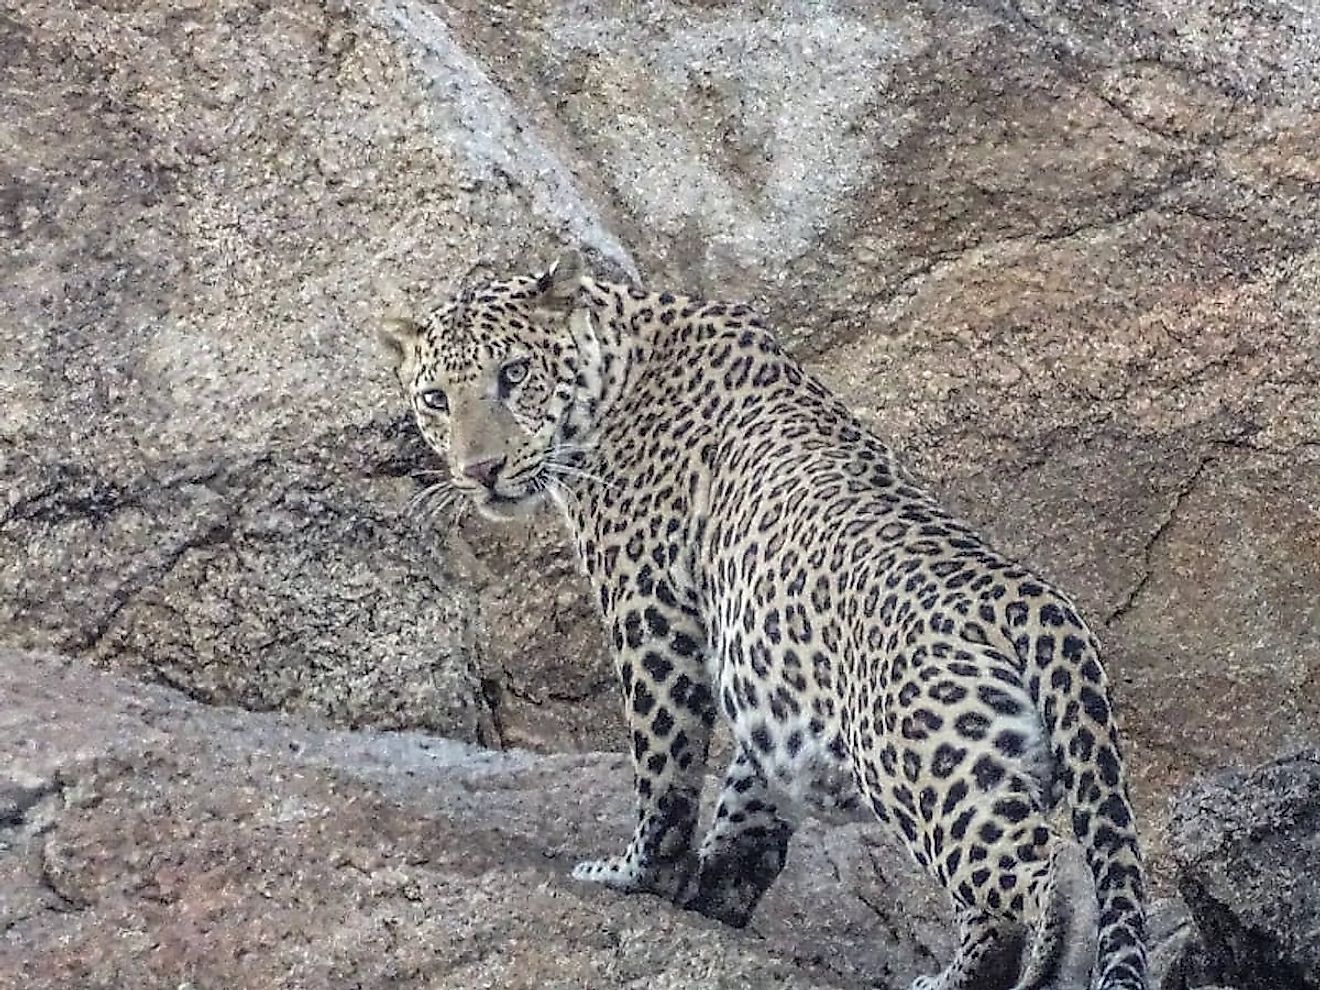 A gorgeous leopard in Narlai. Image credit: Manvendra Singh